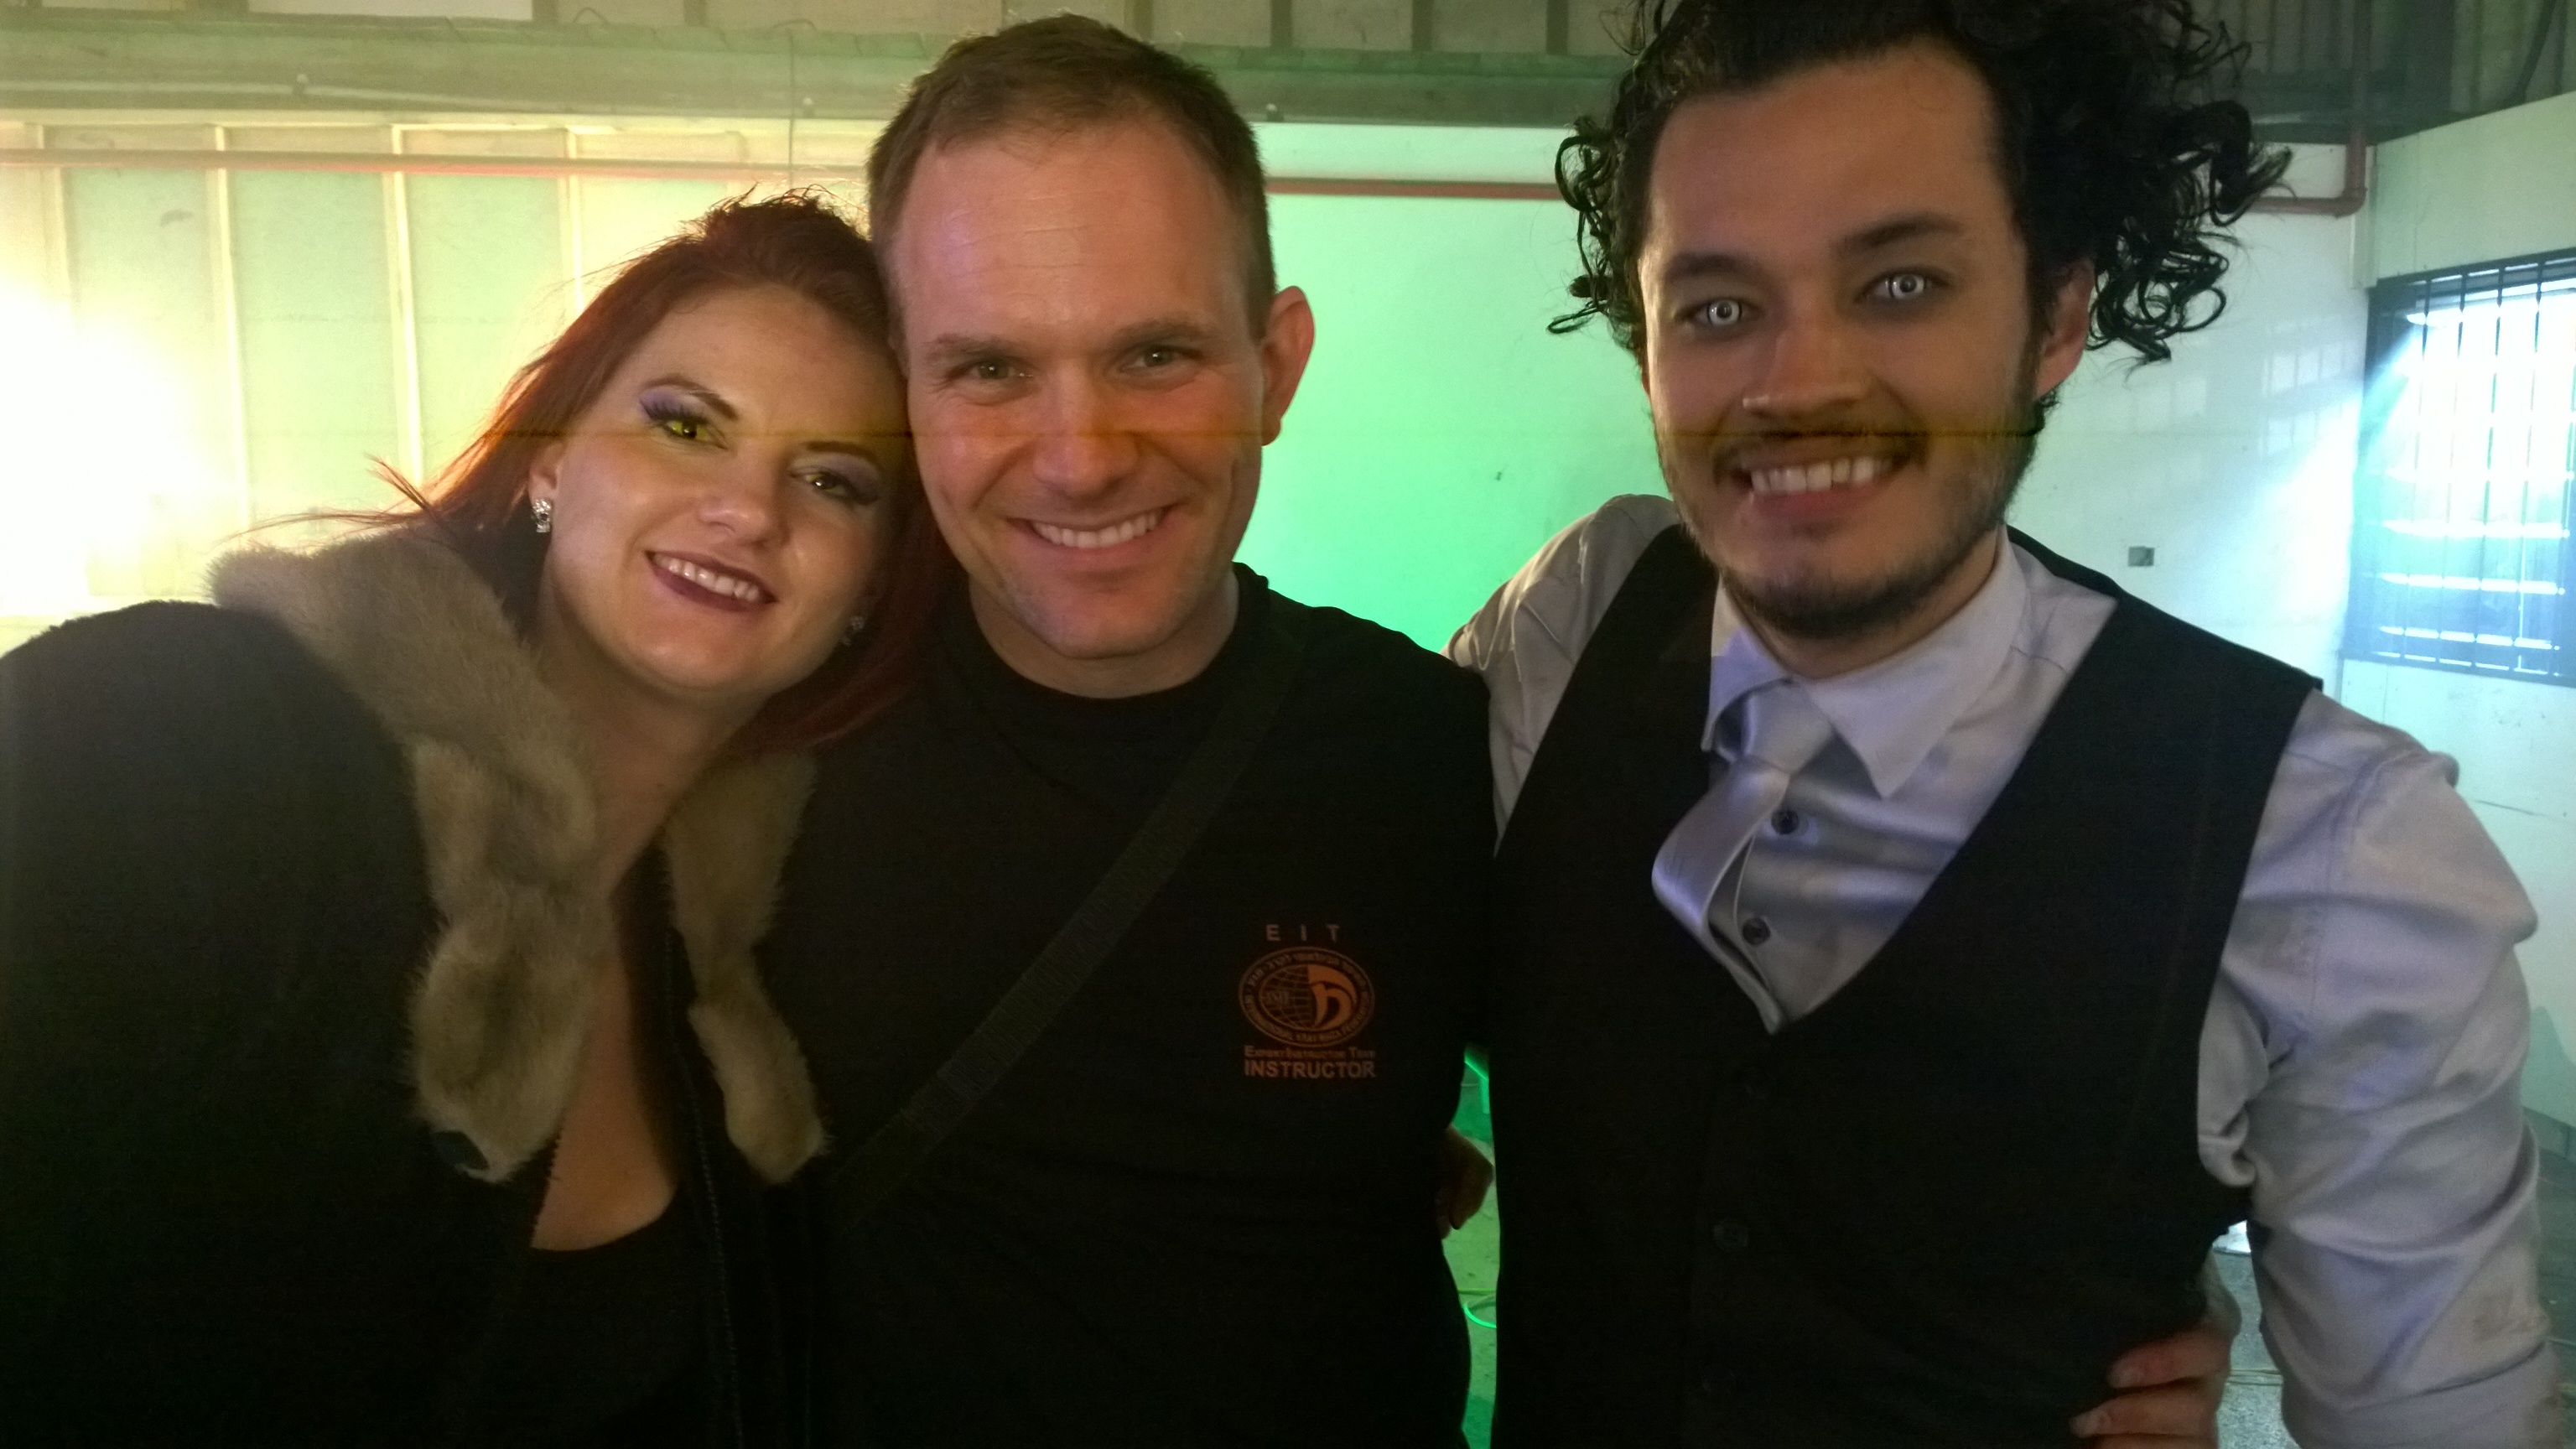 On set of Bite Club with Kathrin Kohl (Fighting She-wolf) and Matt McTaggart (Fighting Vampire).